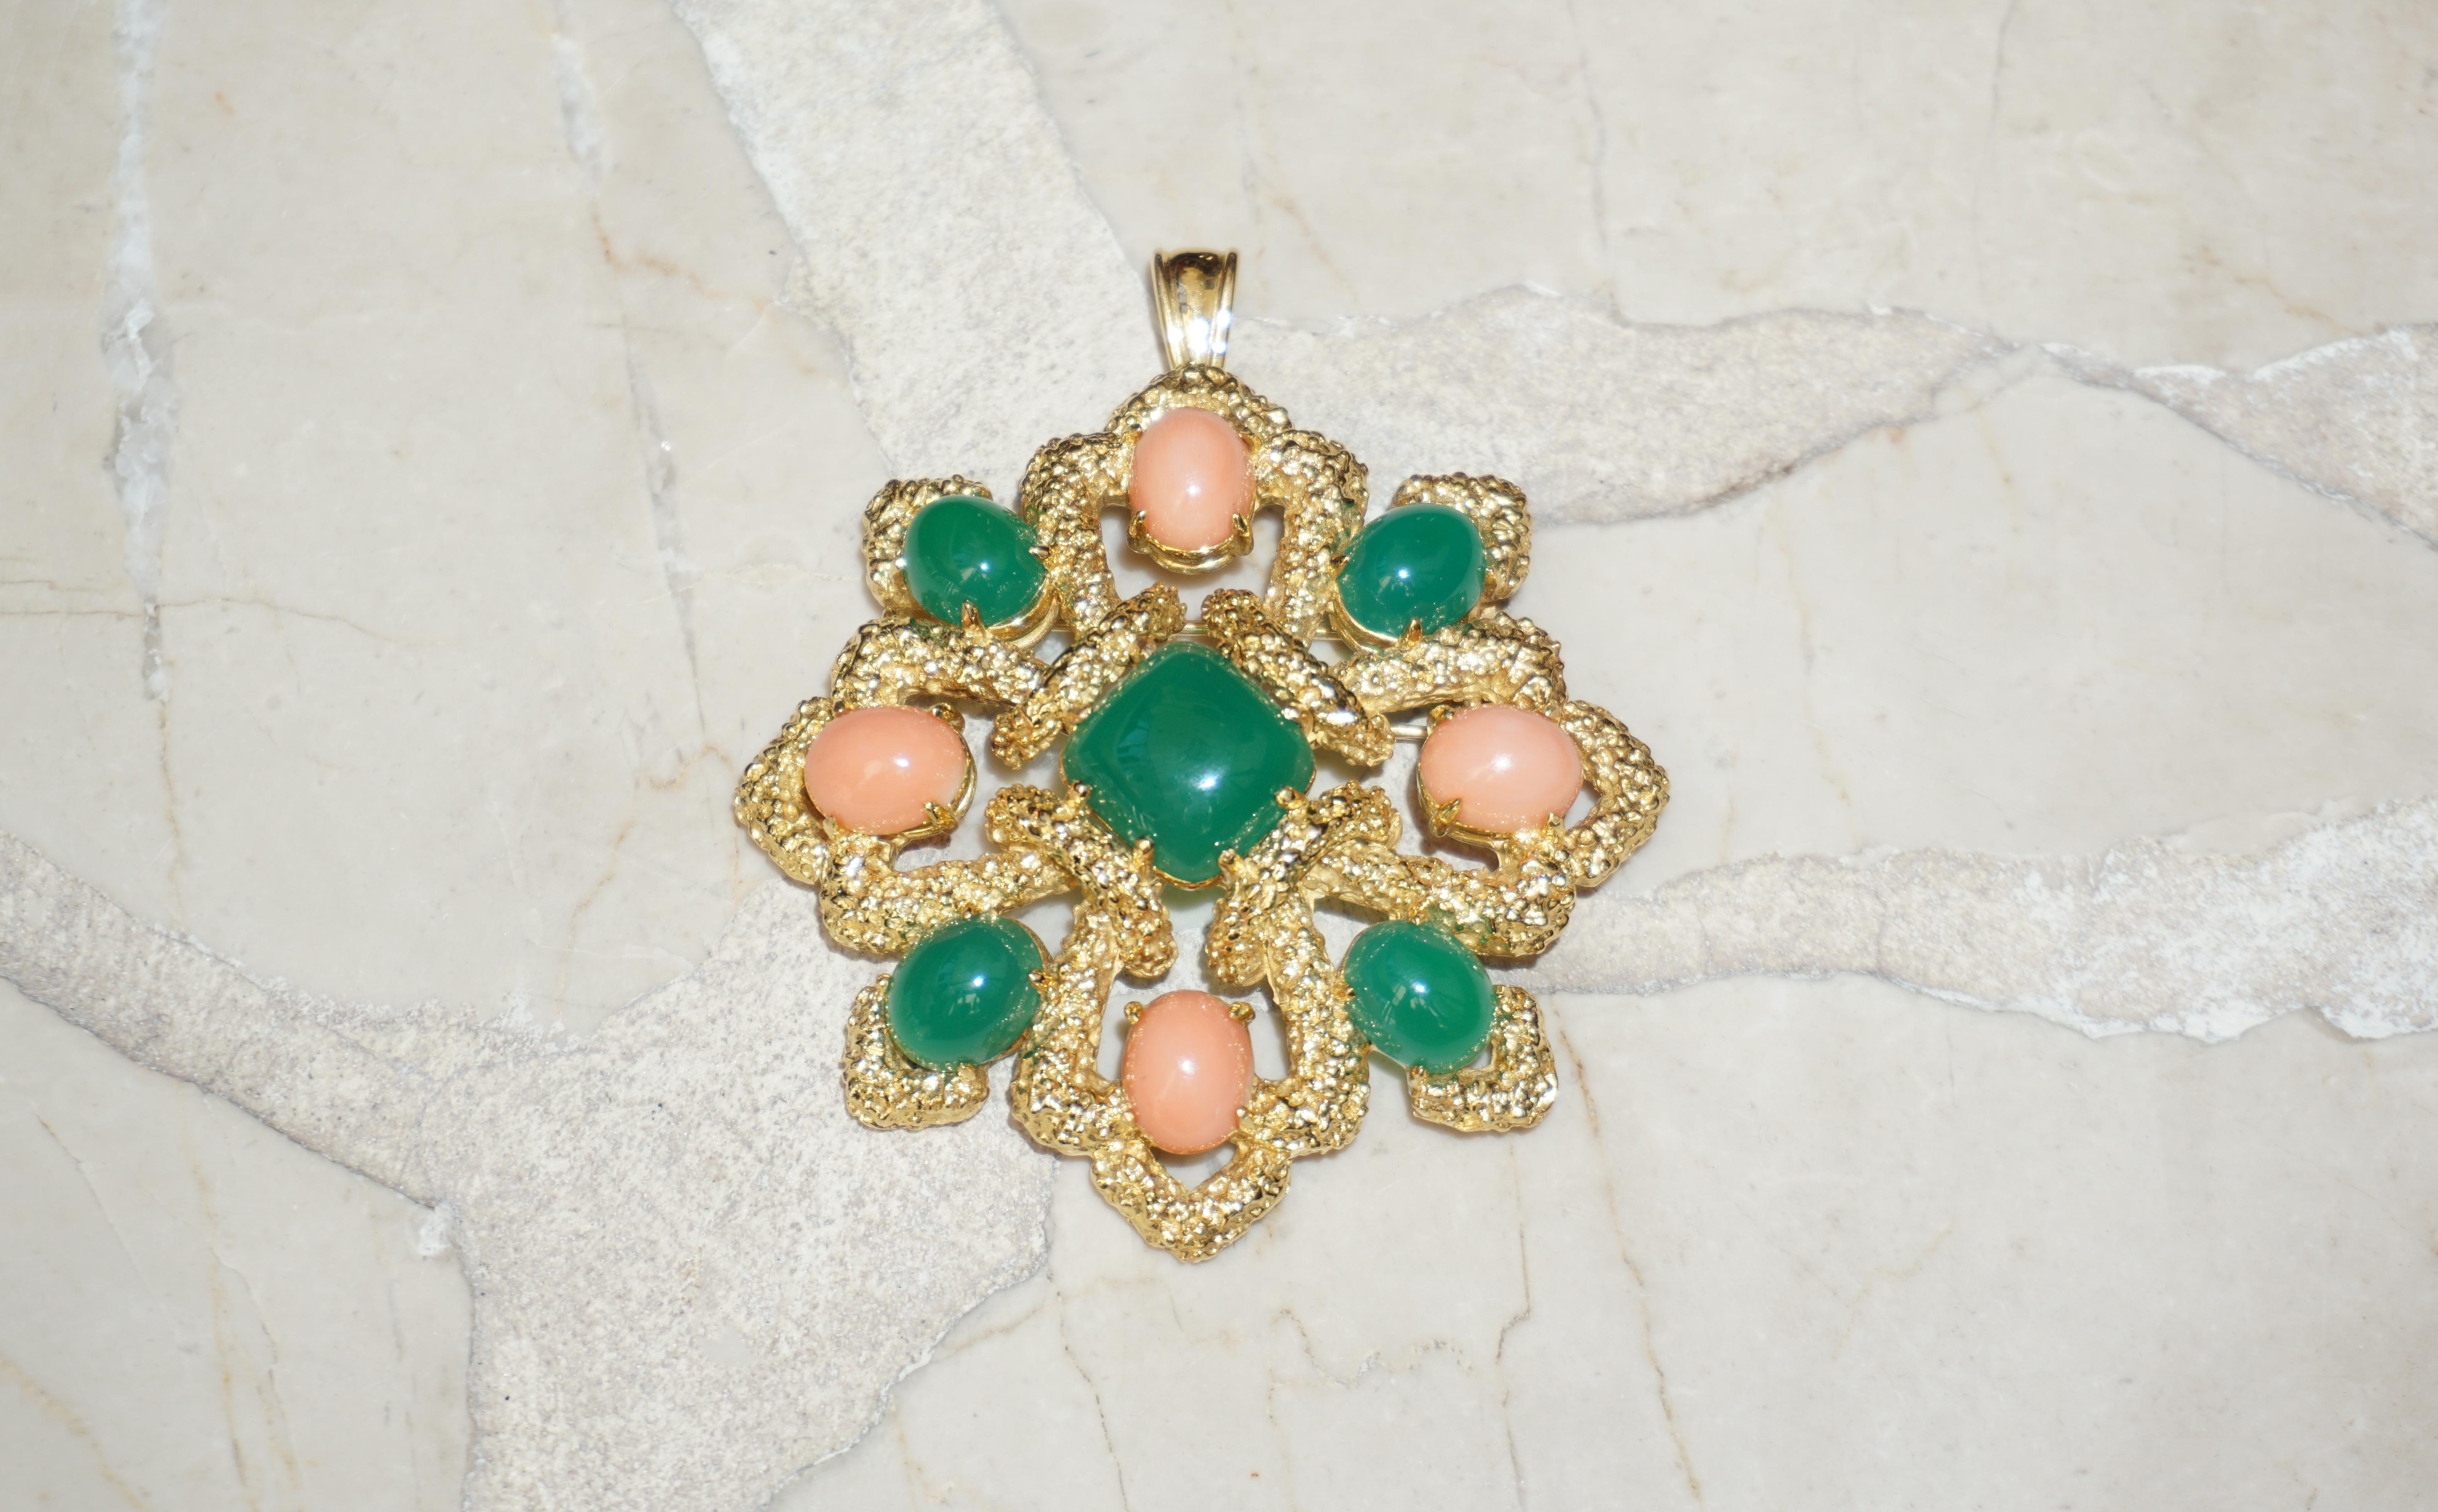 Van Cleef & Arpels 18K Gold Chrysoprase and Coral Pendant Brooch For Sale 6